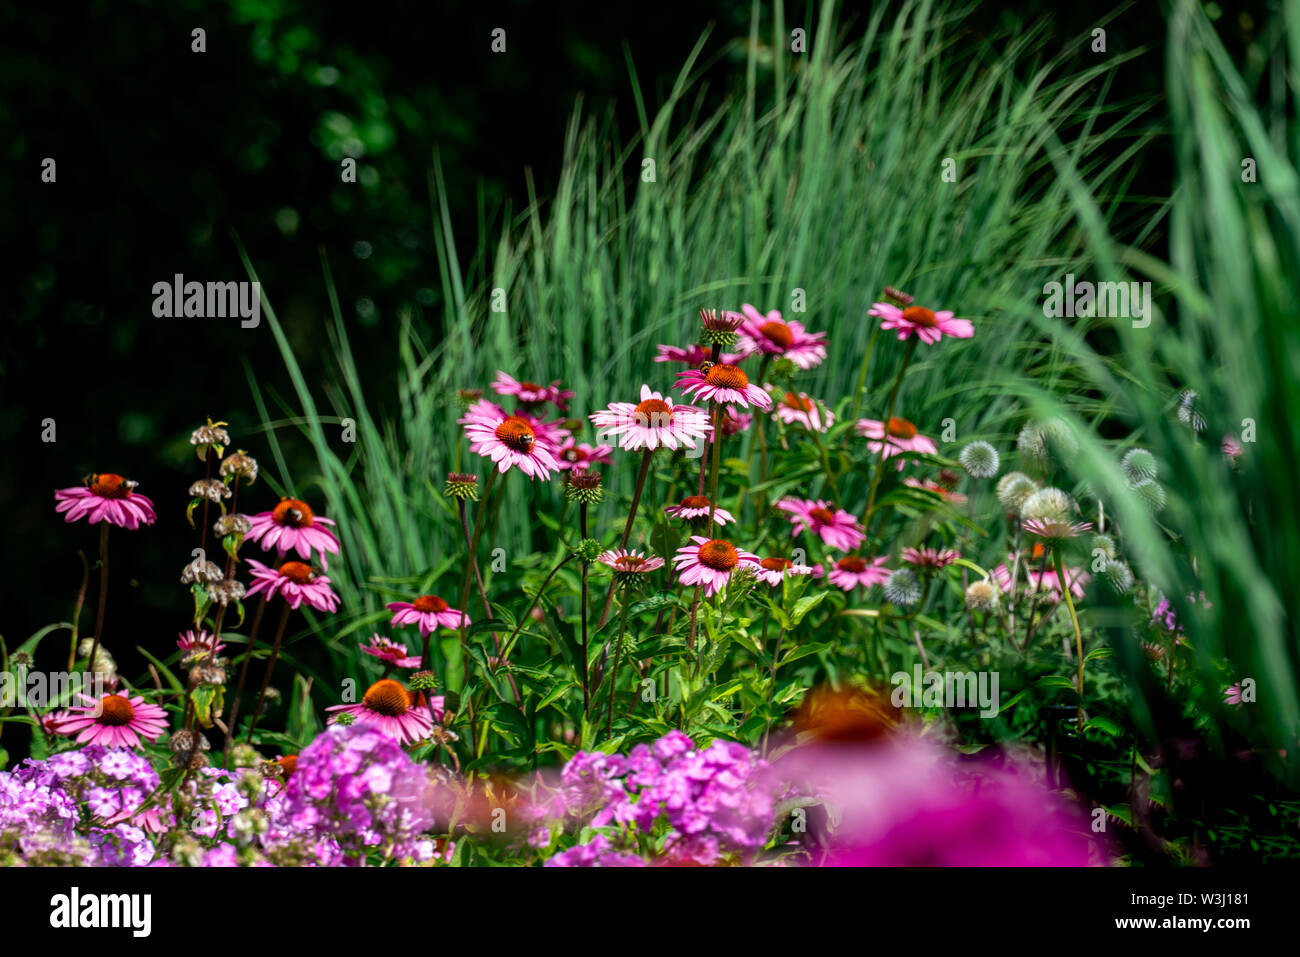 pink and purple phlox and coneflowers with green perennials forming a colourful summer flower bed Stock Photo